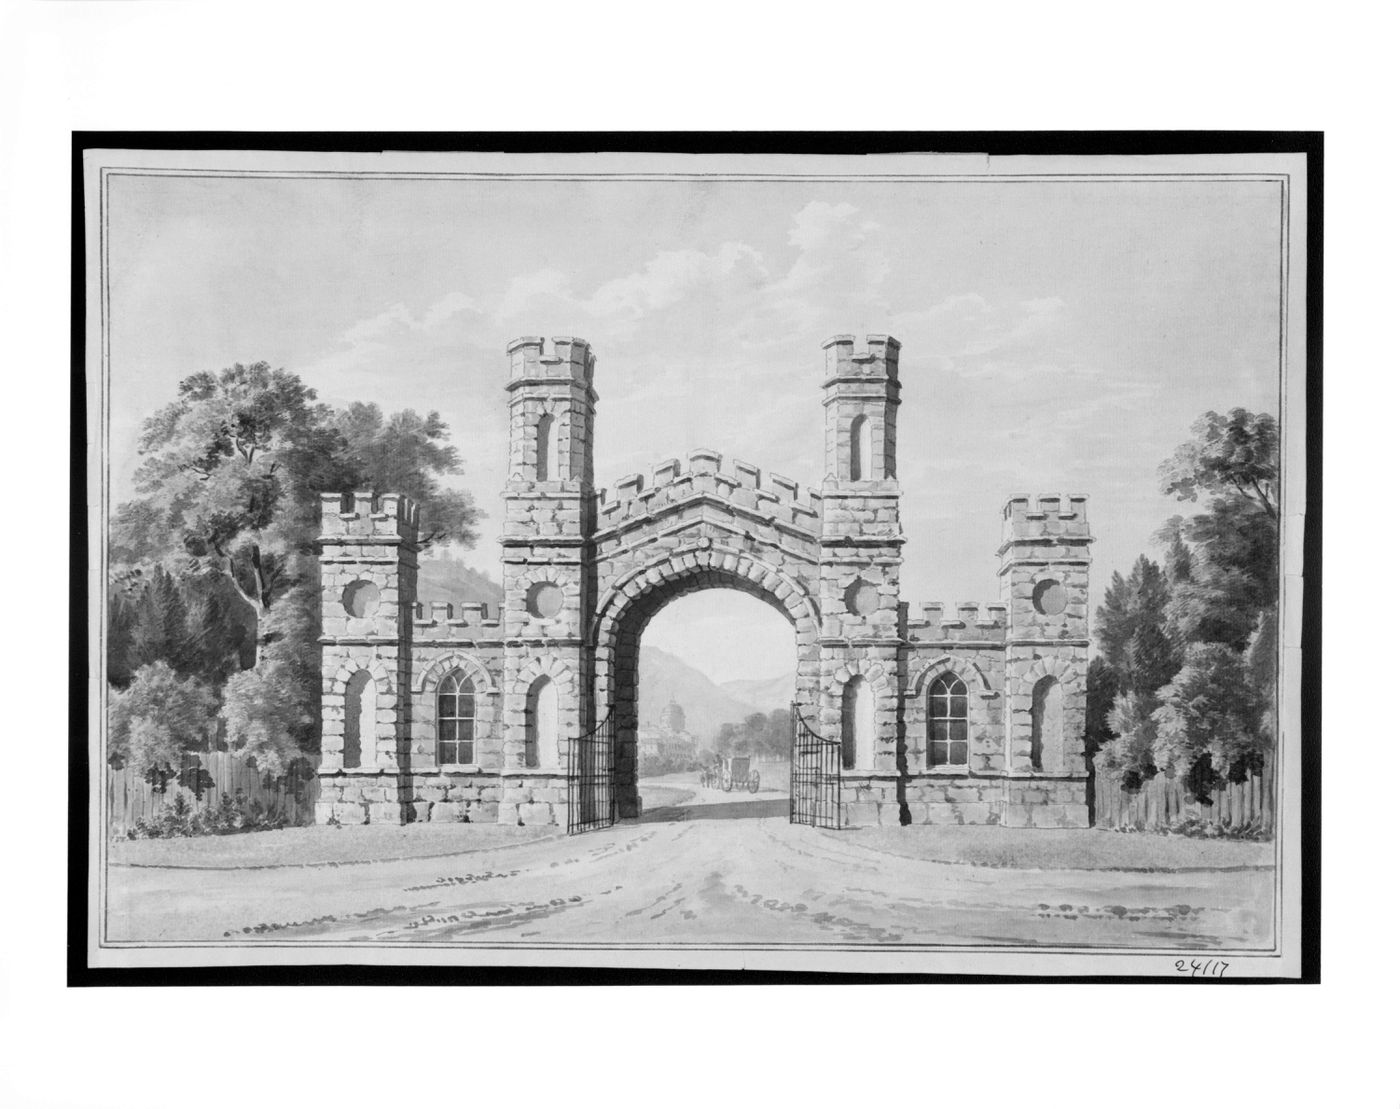 A Gothick gateway, possibly for Windsor Great Park, Surrey